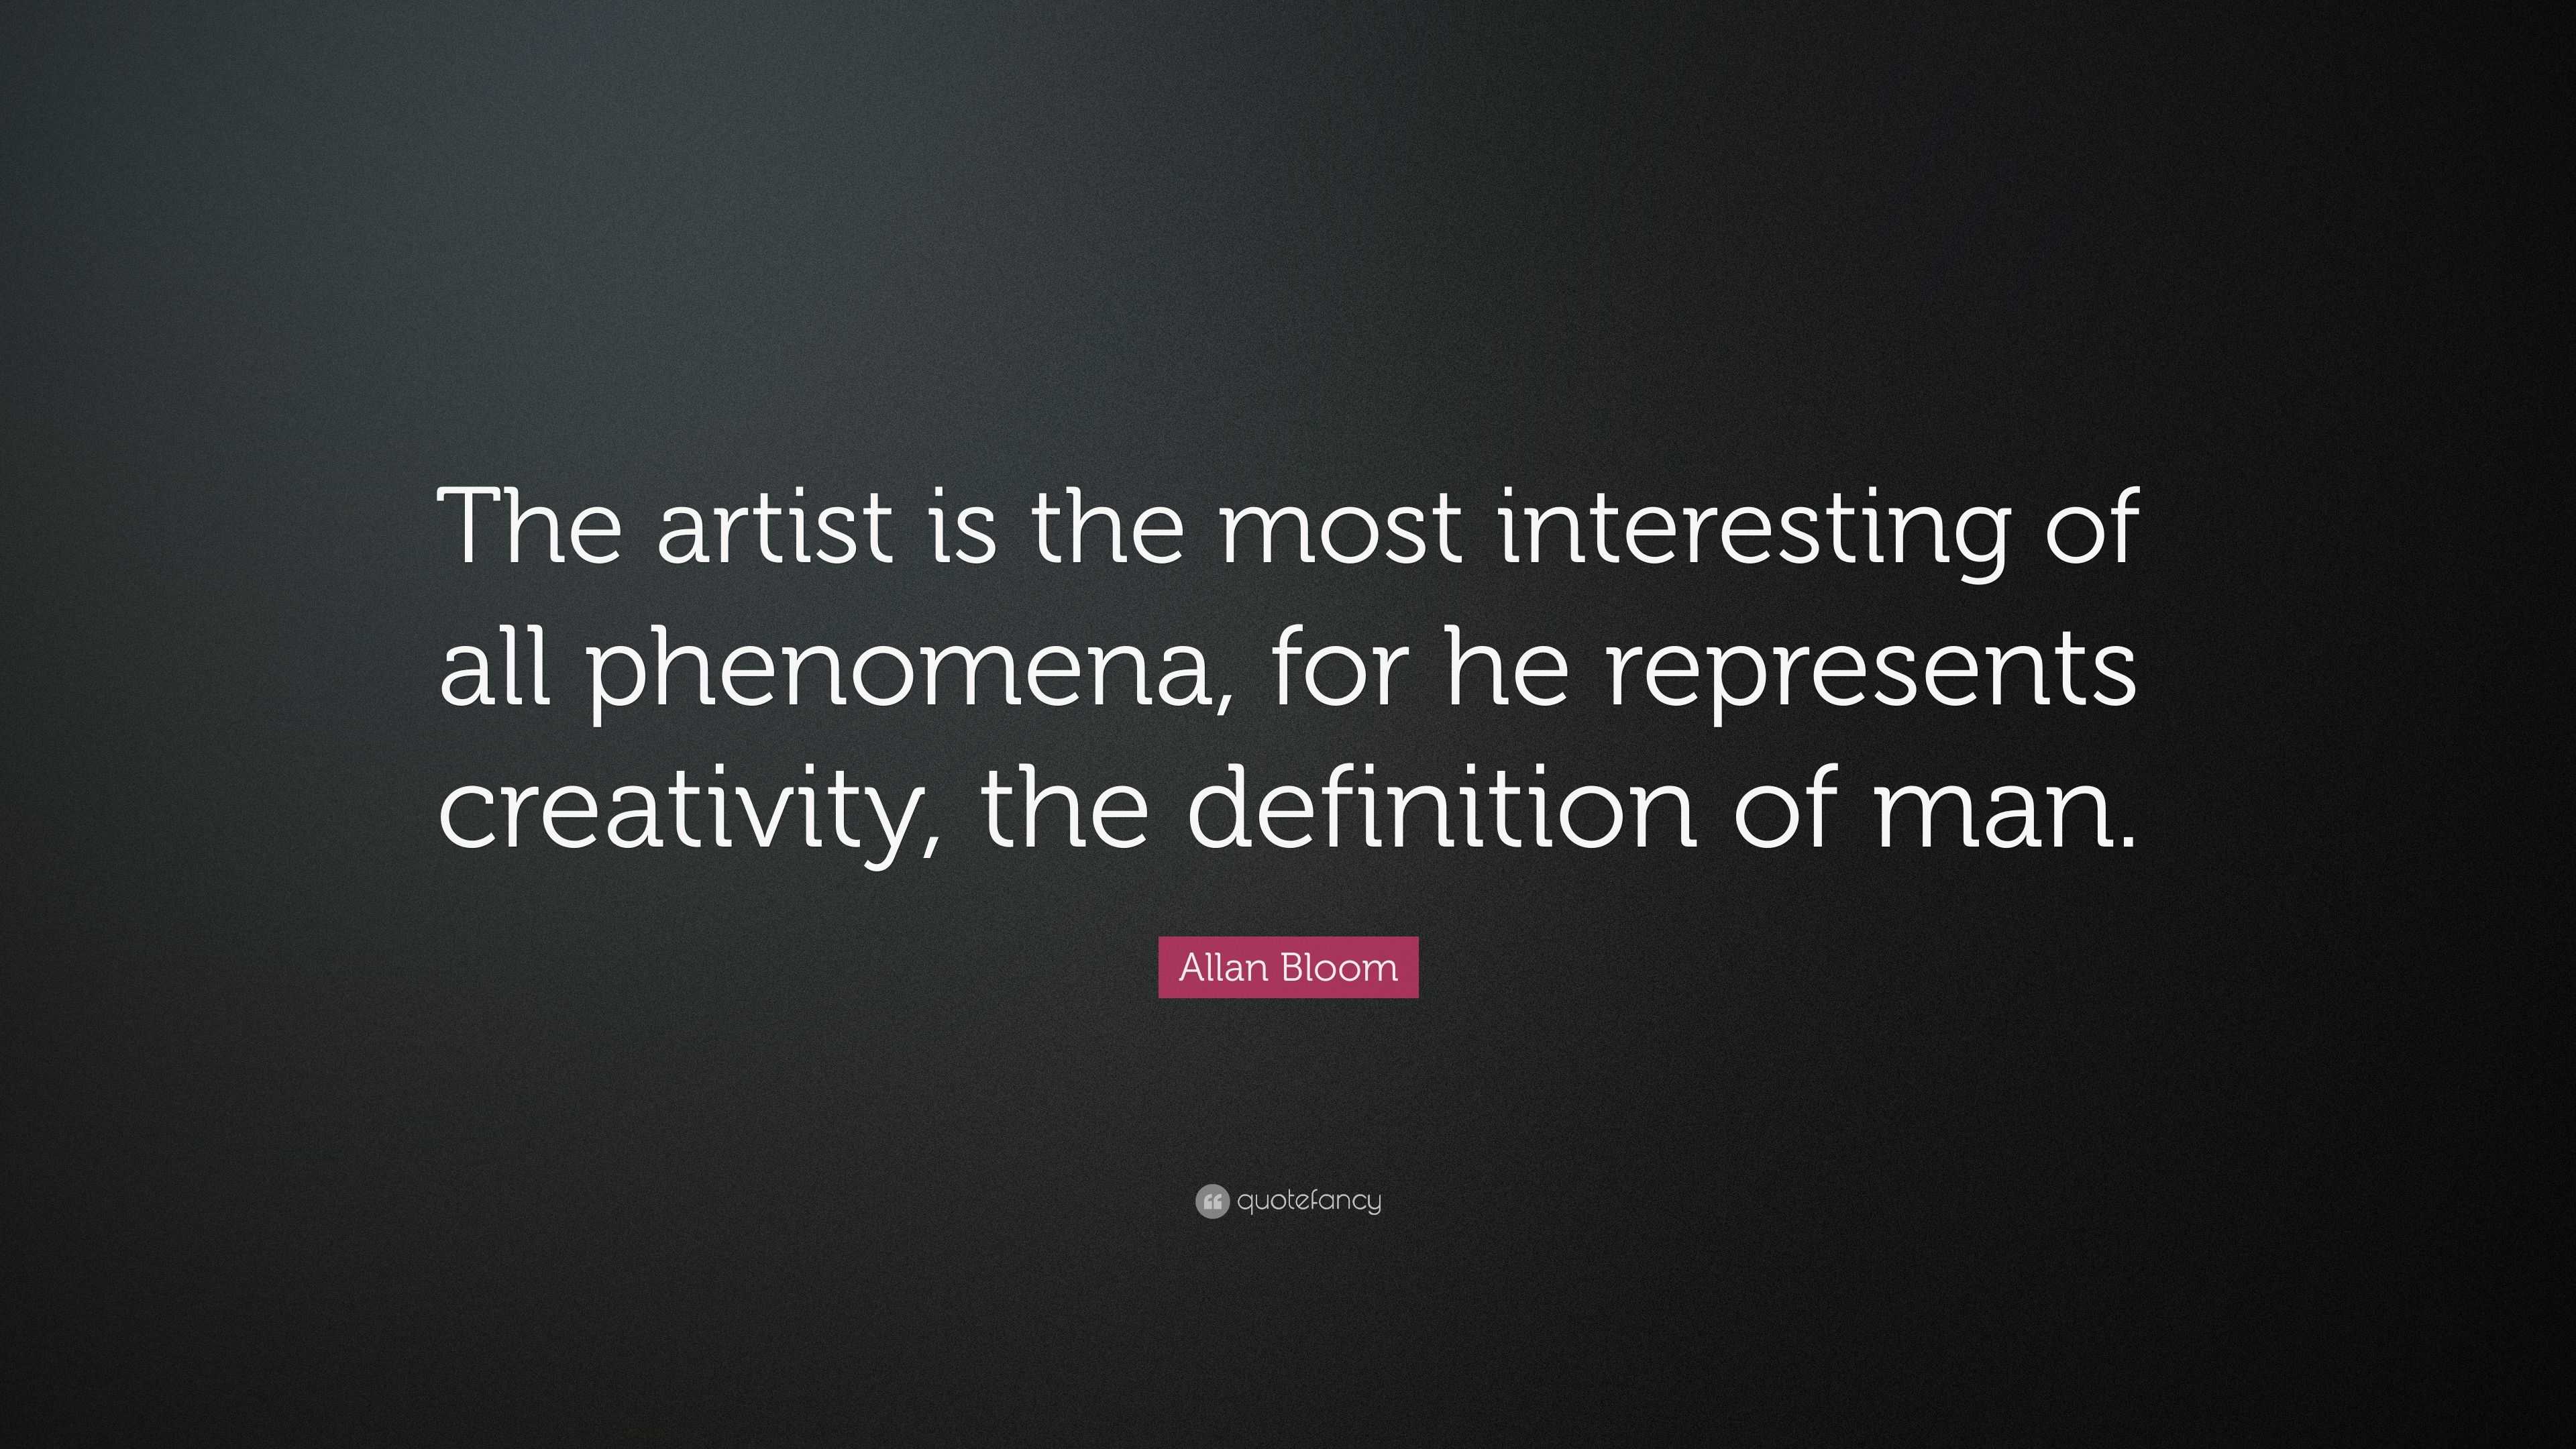 Allan Bloom Quote: “The artist is the